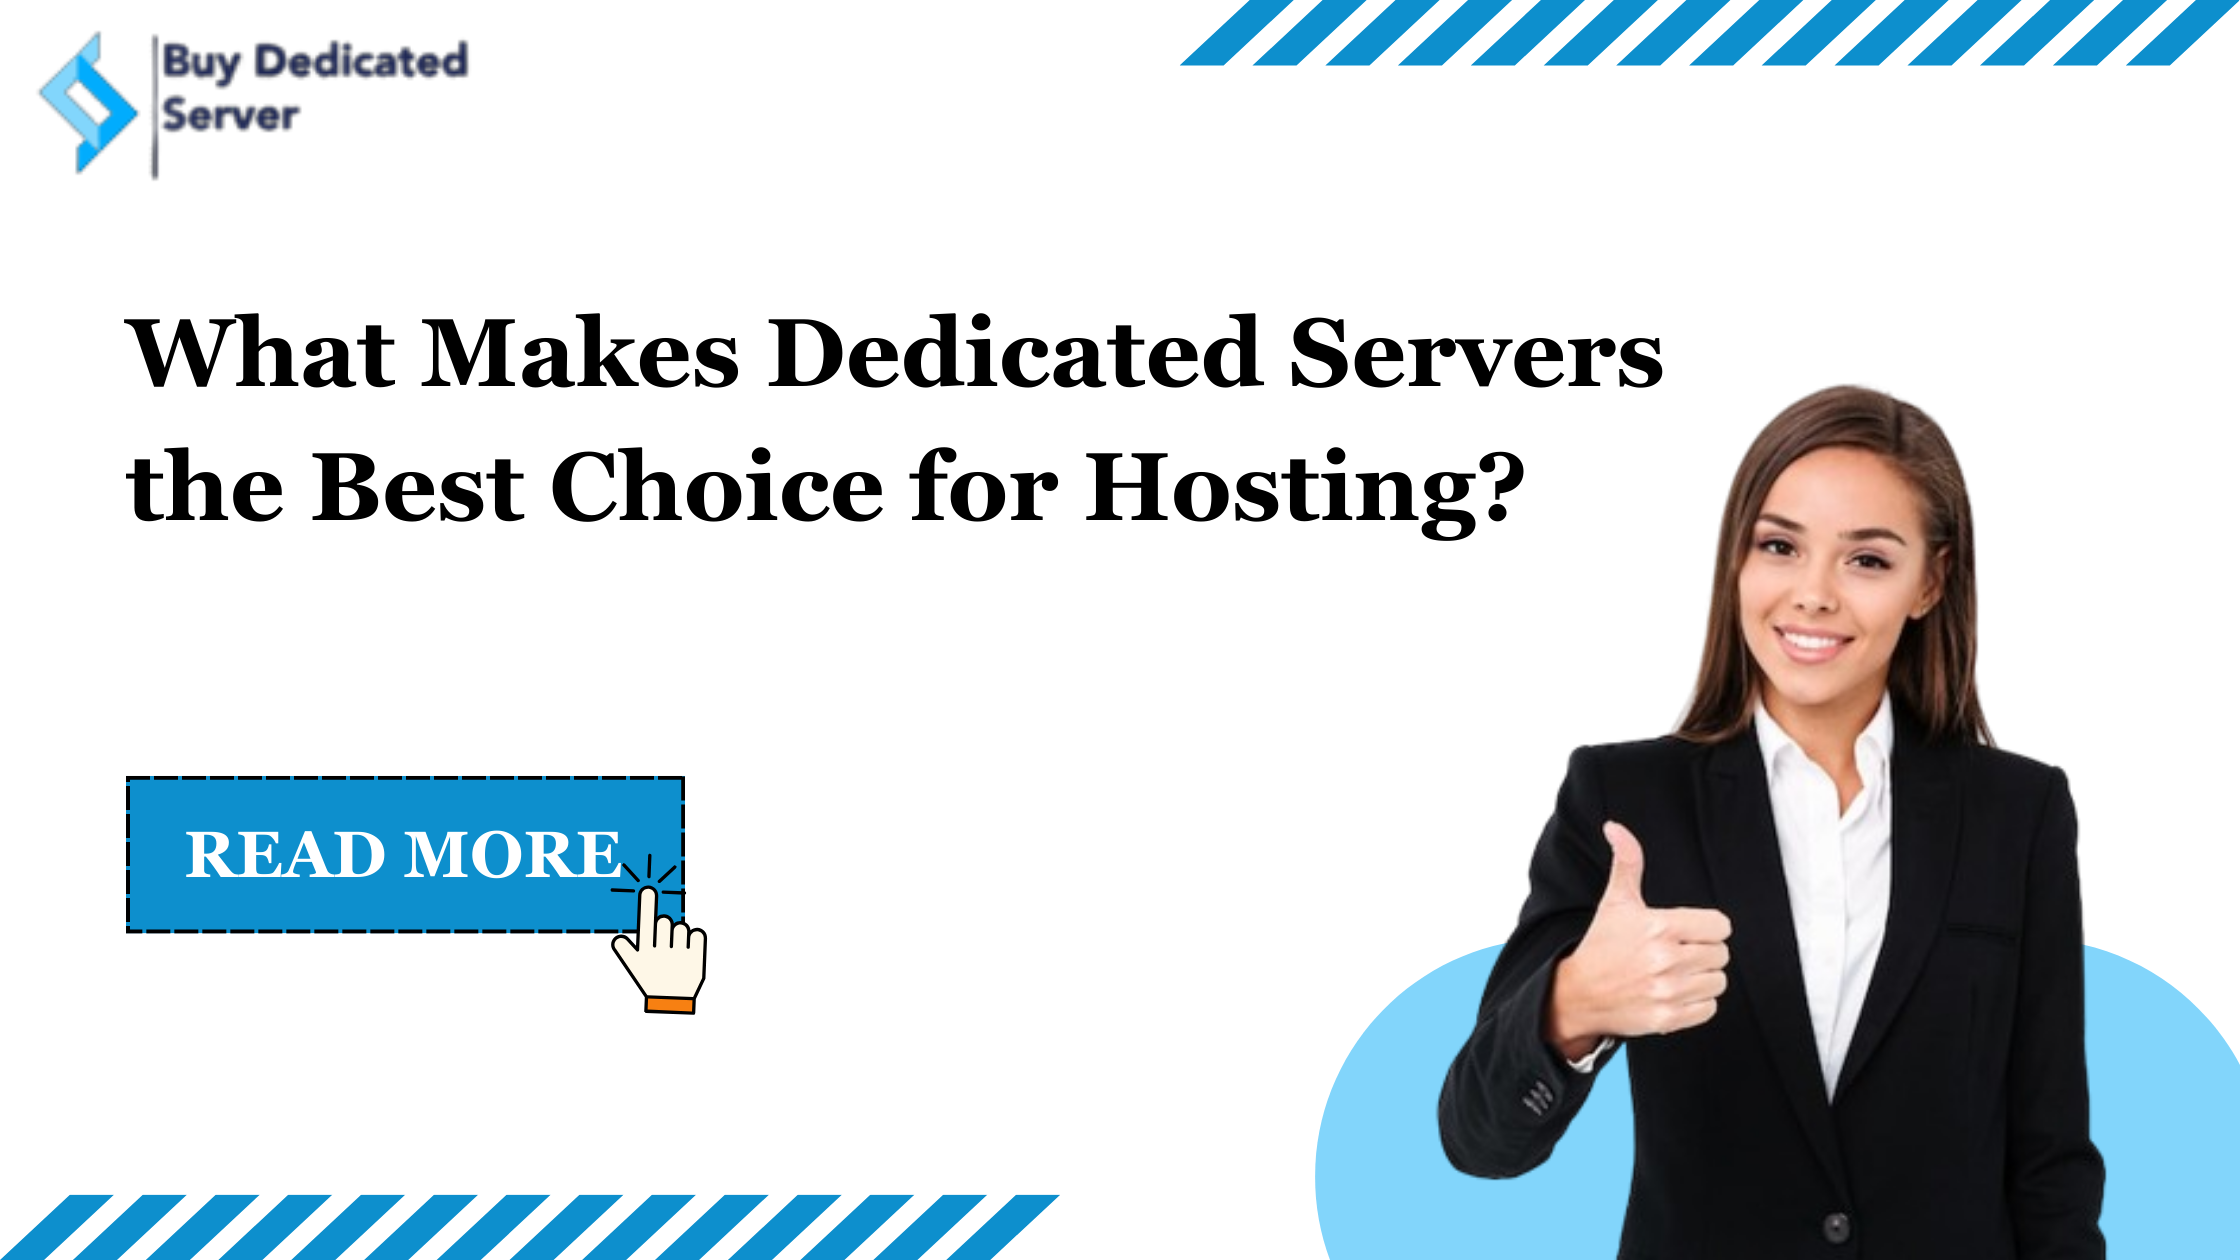 What Makes Dedicated Servers the Best Choice for Hosting